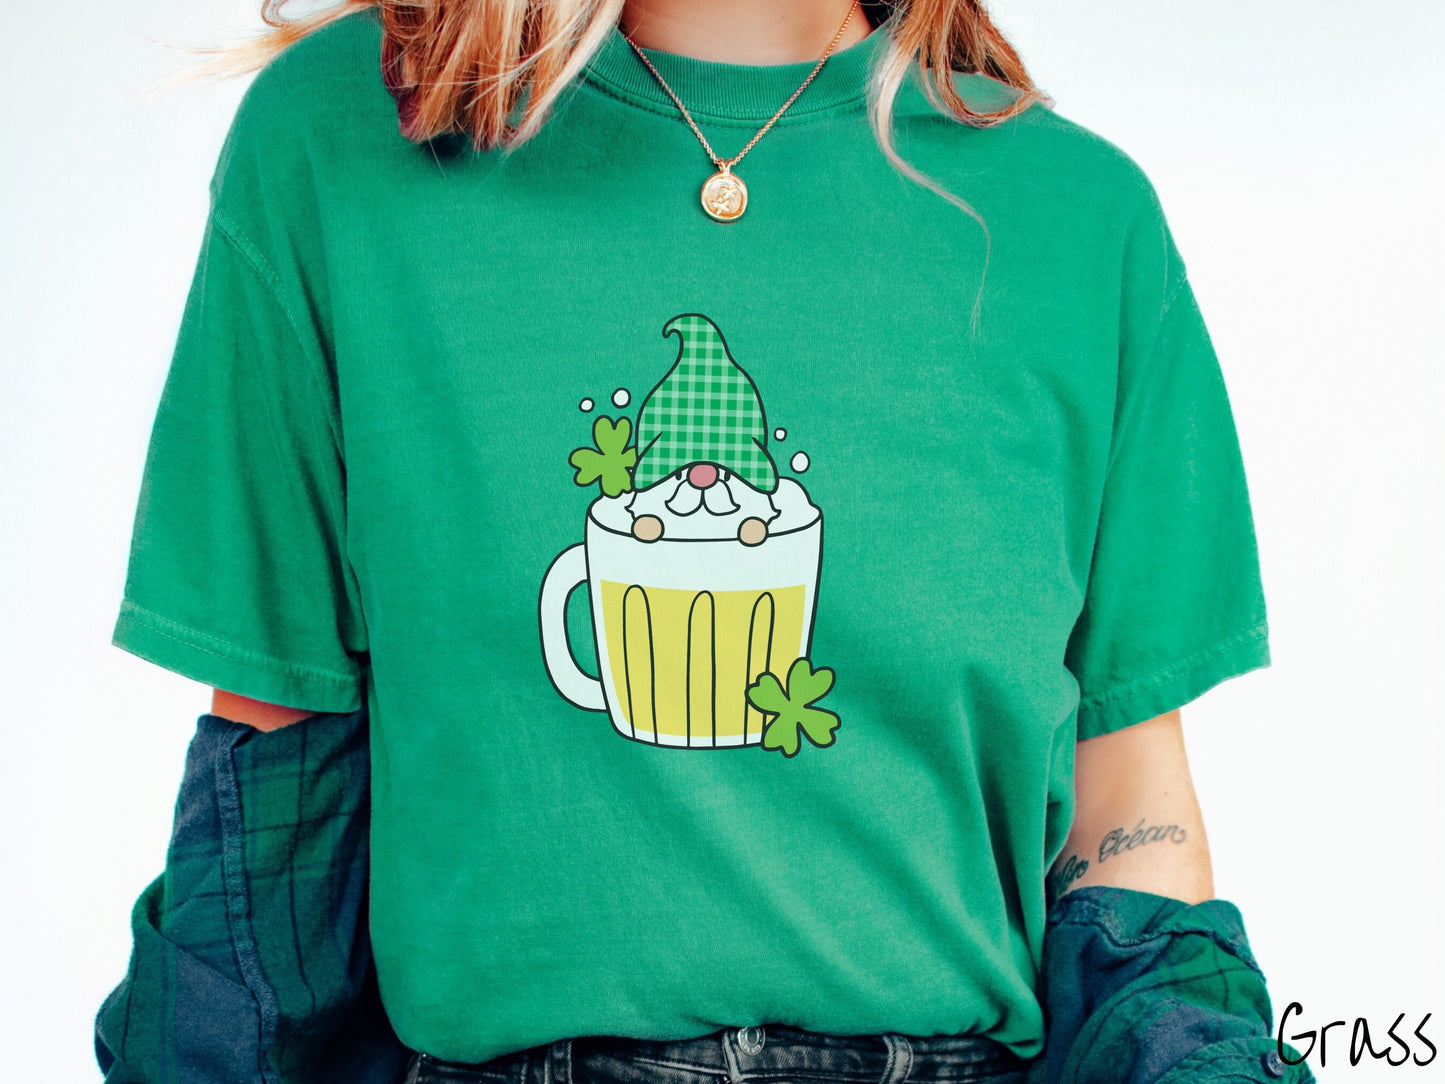 A woman wearing a vintage, grass colored shirt with a beer filled mug in the center with a green hat wearing gnome peeking over the top of the glass and green clovers in the background.